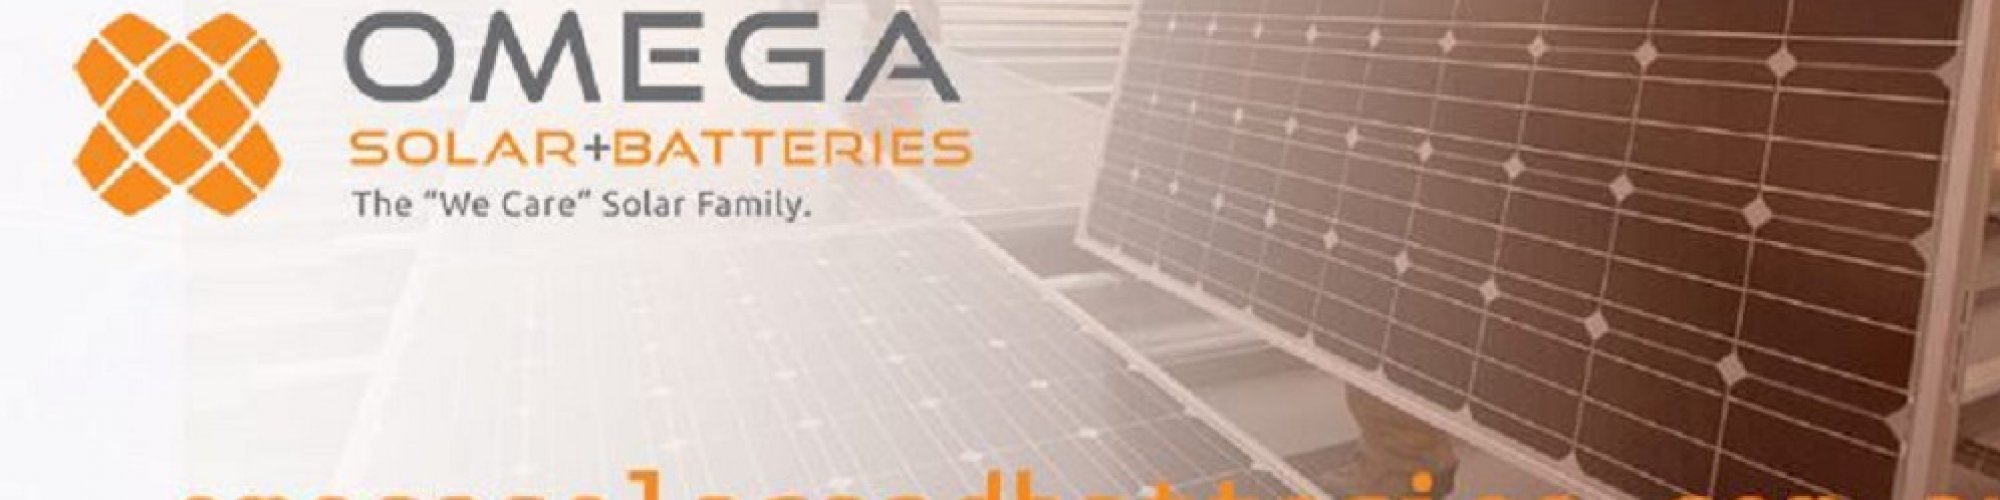 omega solar and batteries